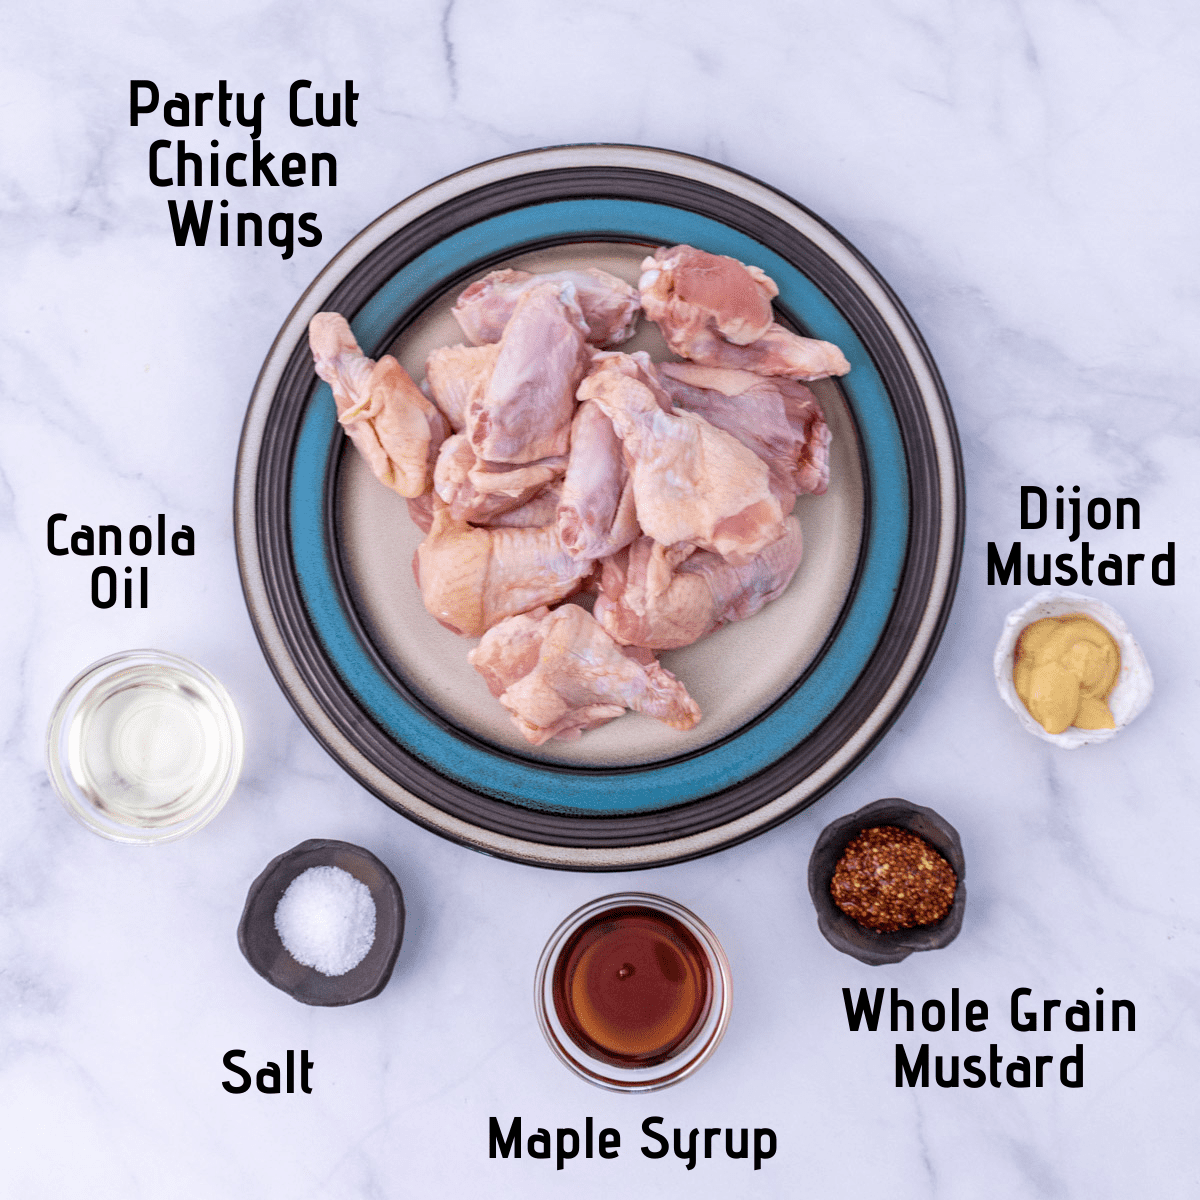 Raw ingredients laid out and labeled, chicken wings, dijon mustard, whole grain mustard, maple syrup, kosher salt and canola oil.